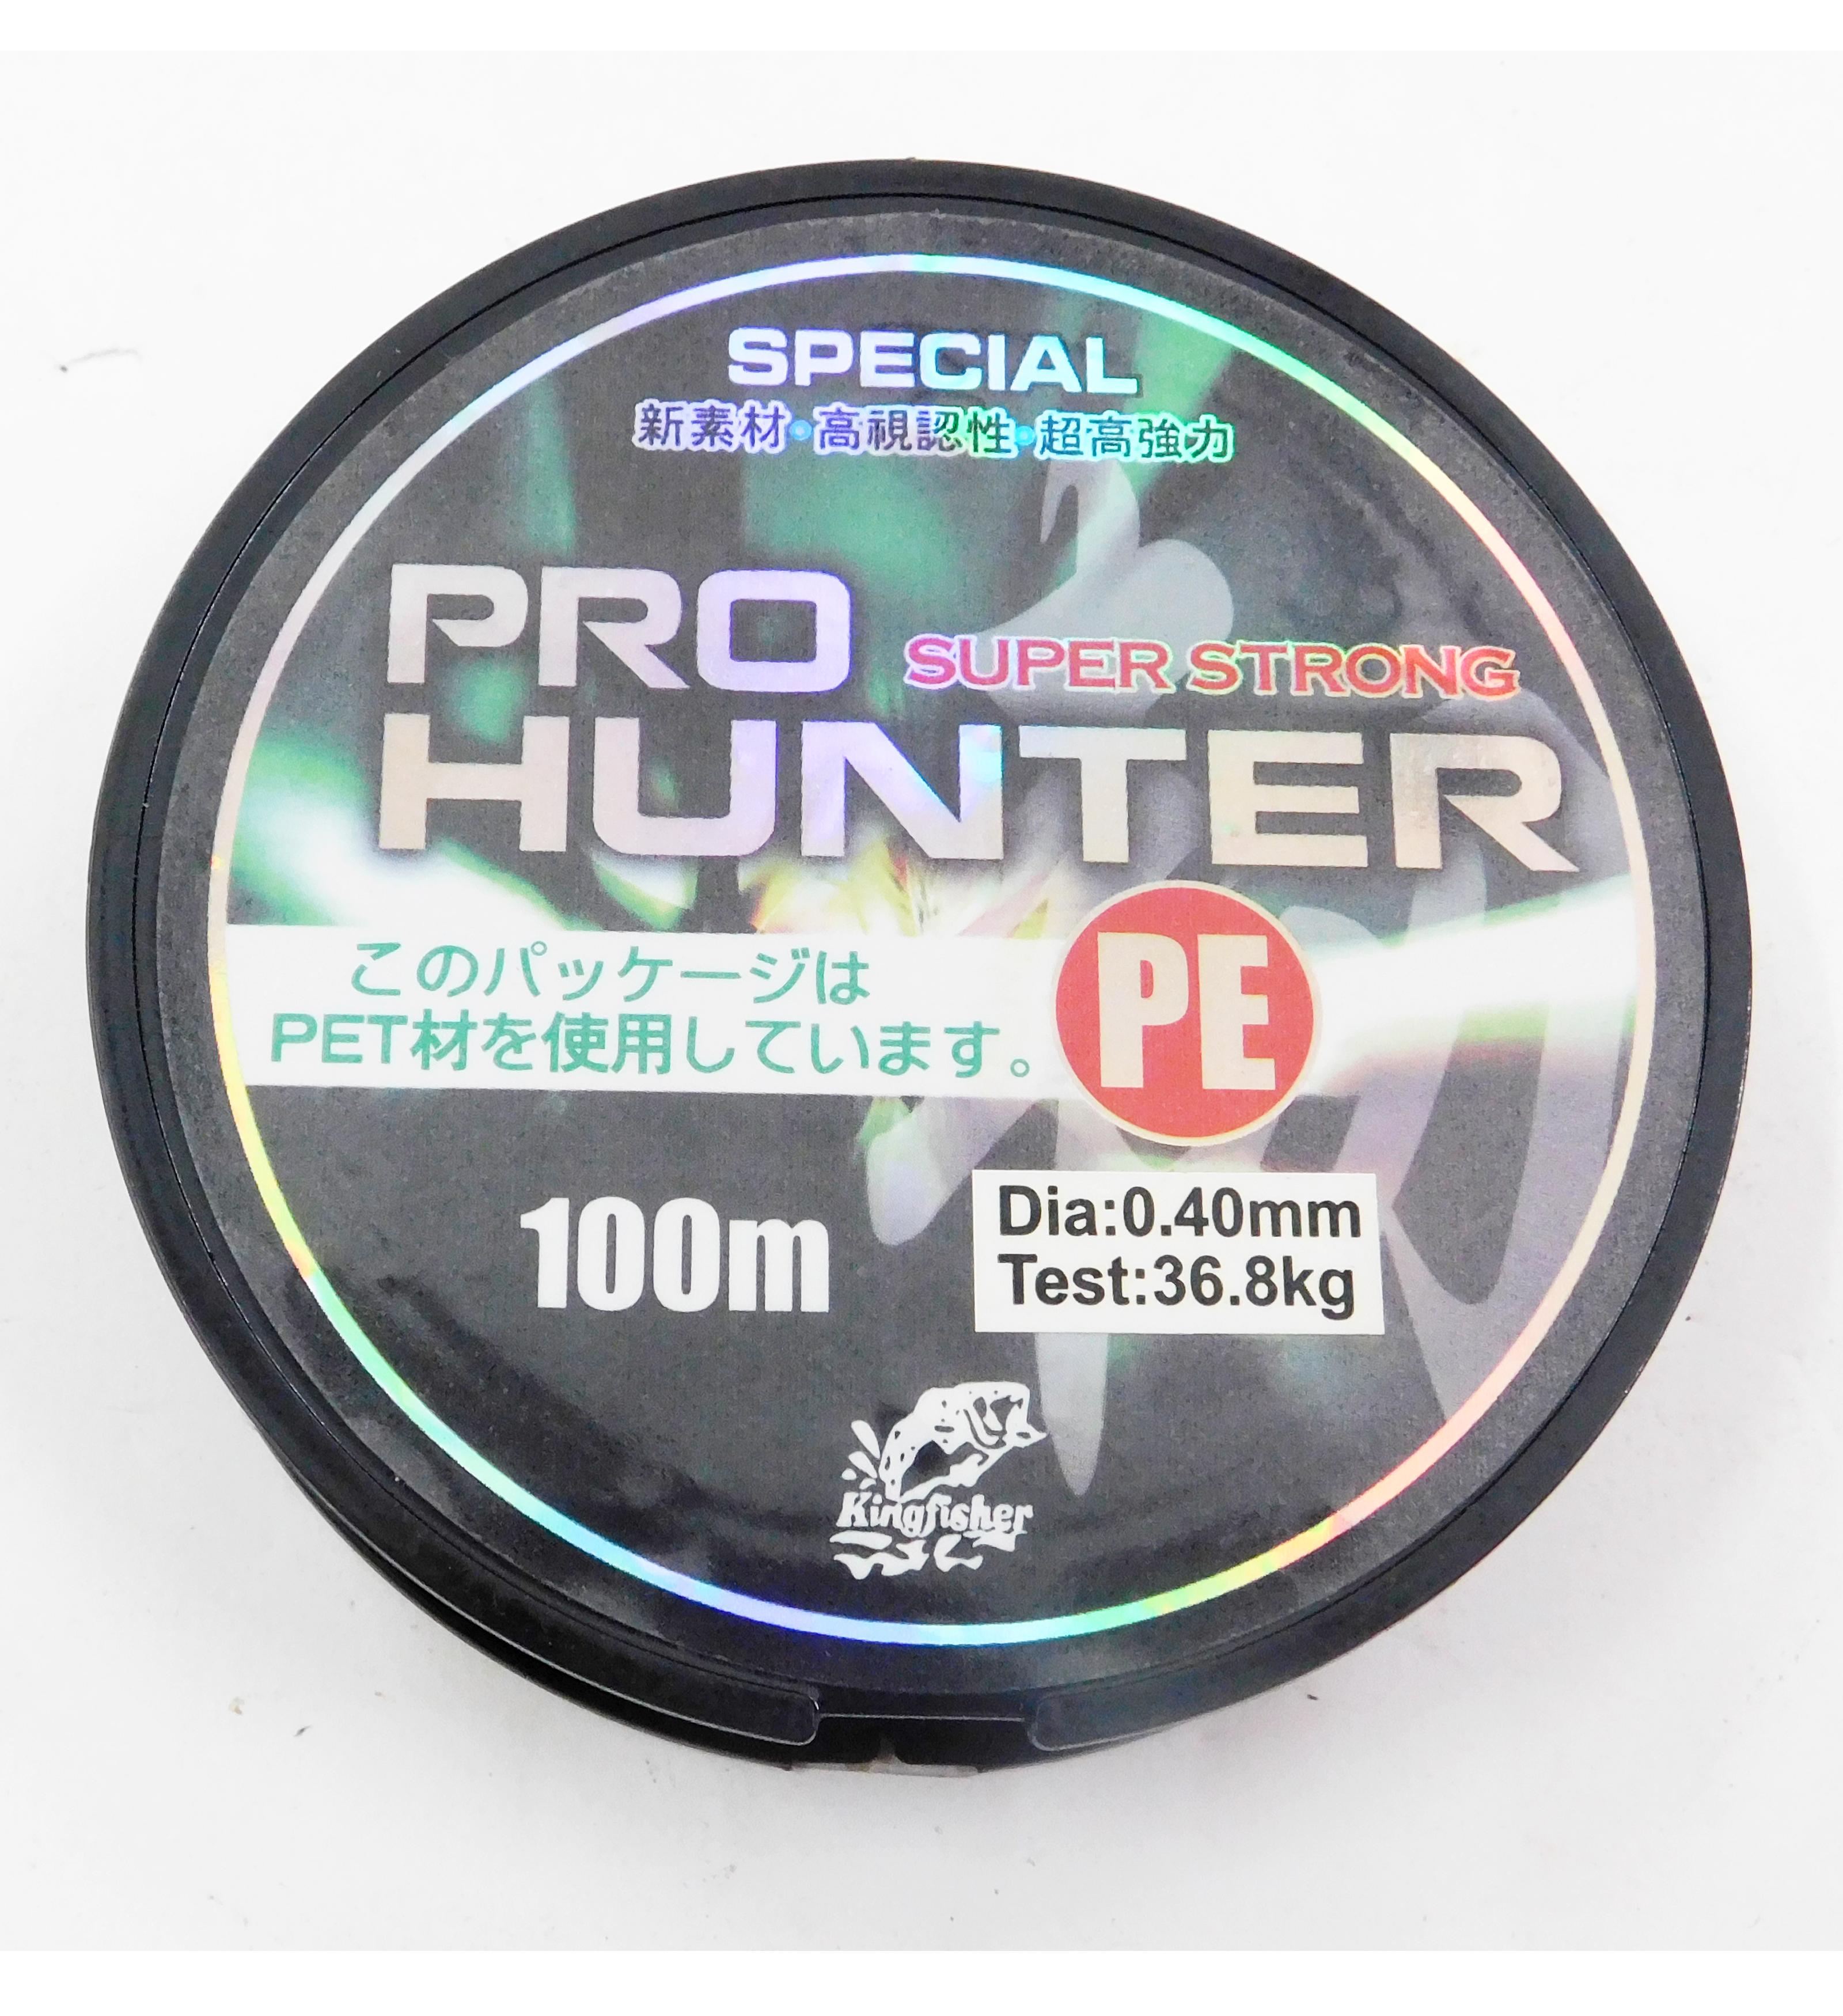 Buy Super Strong Pro Hunter Braided 100m Fishing Line Online at